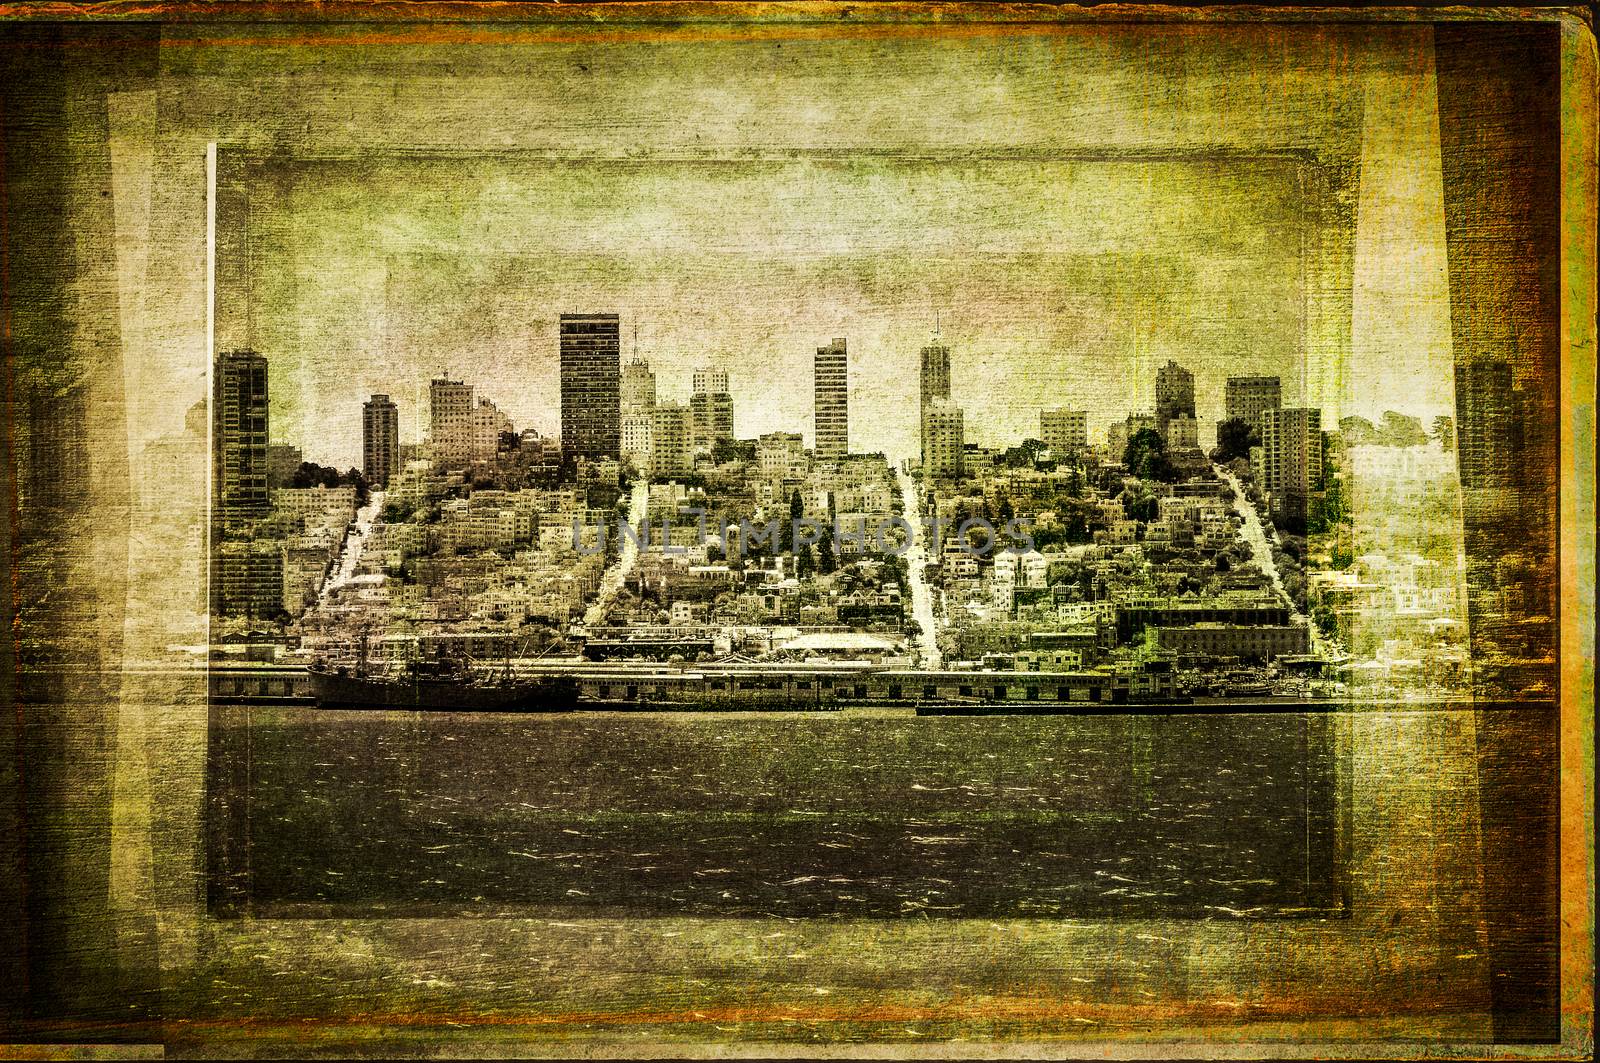 View of San Francisco skyline in vintage filtered textured style, USA